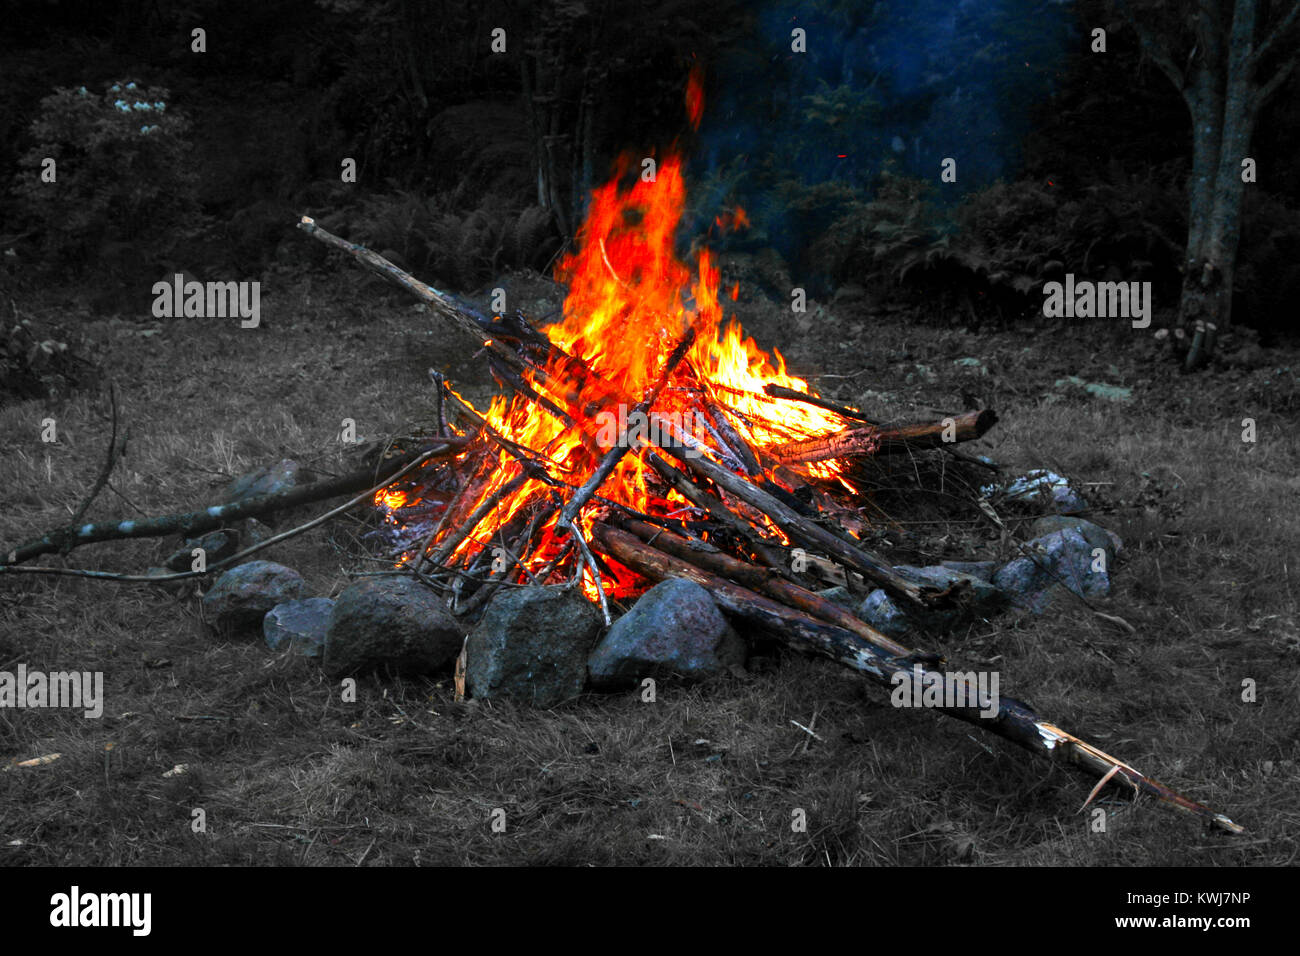 Bonfire - Celebrating Midsummer at camping site. Background desaturated. Stock Photo